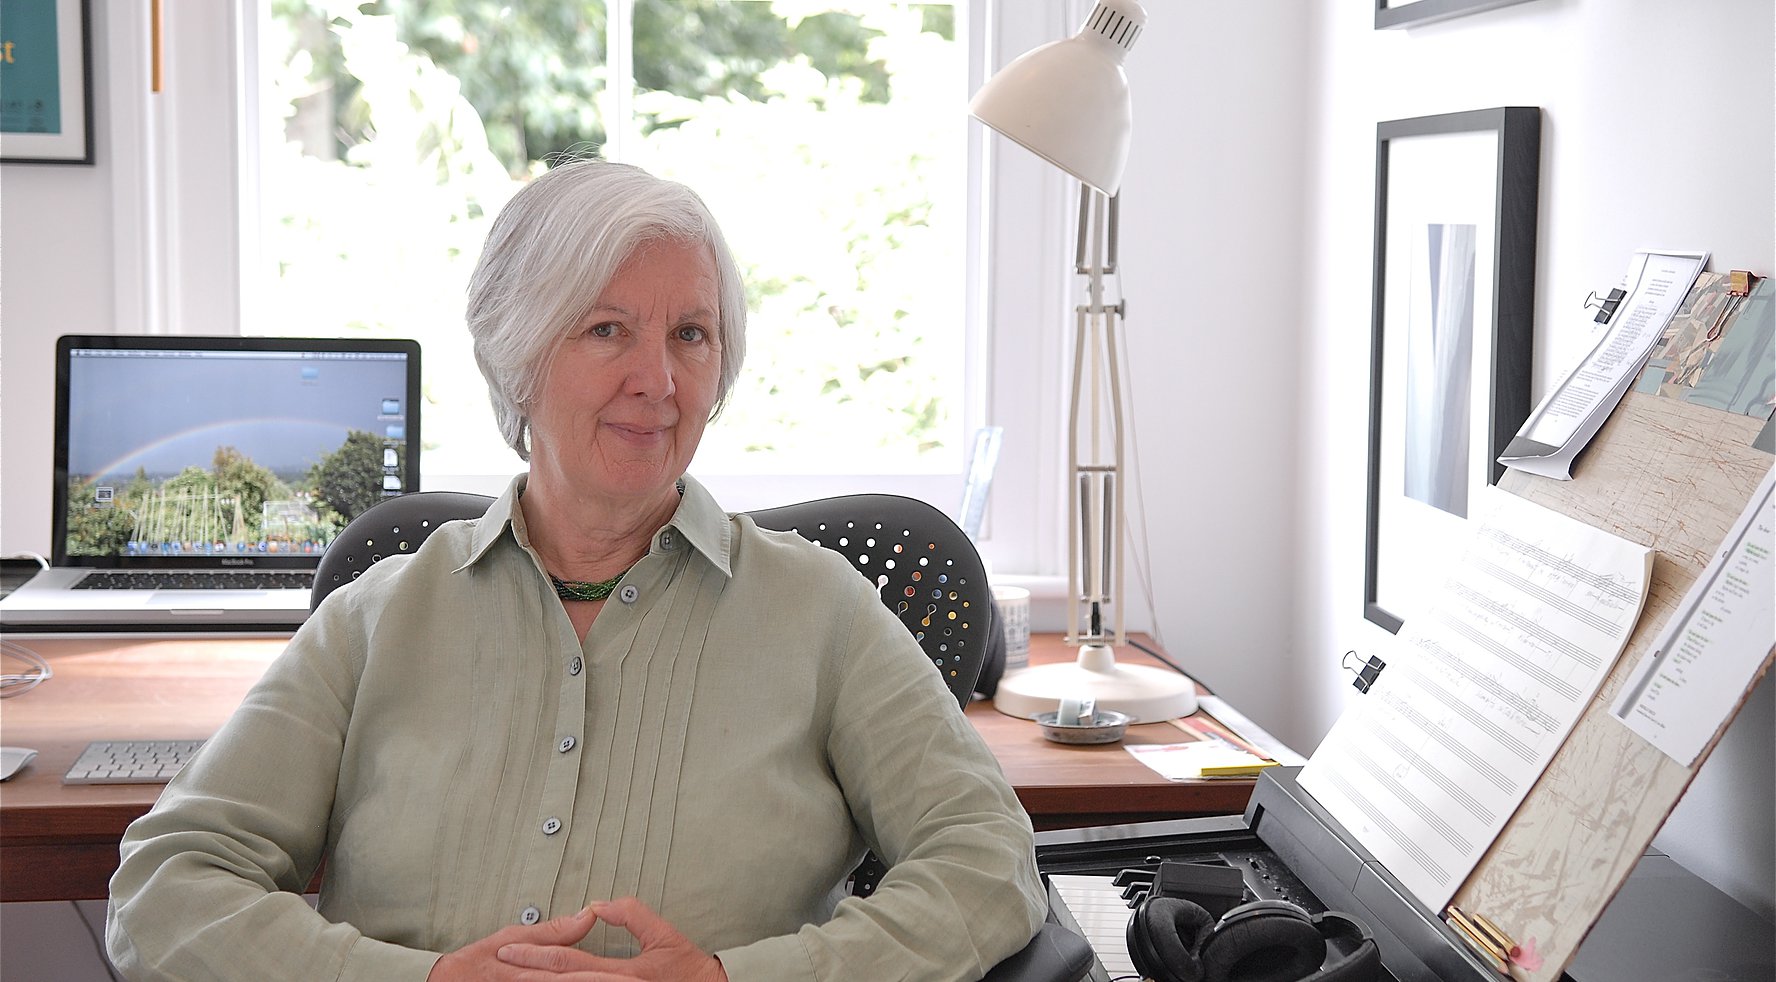 Winter Song by Judith Weir: Resonate